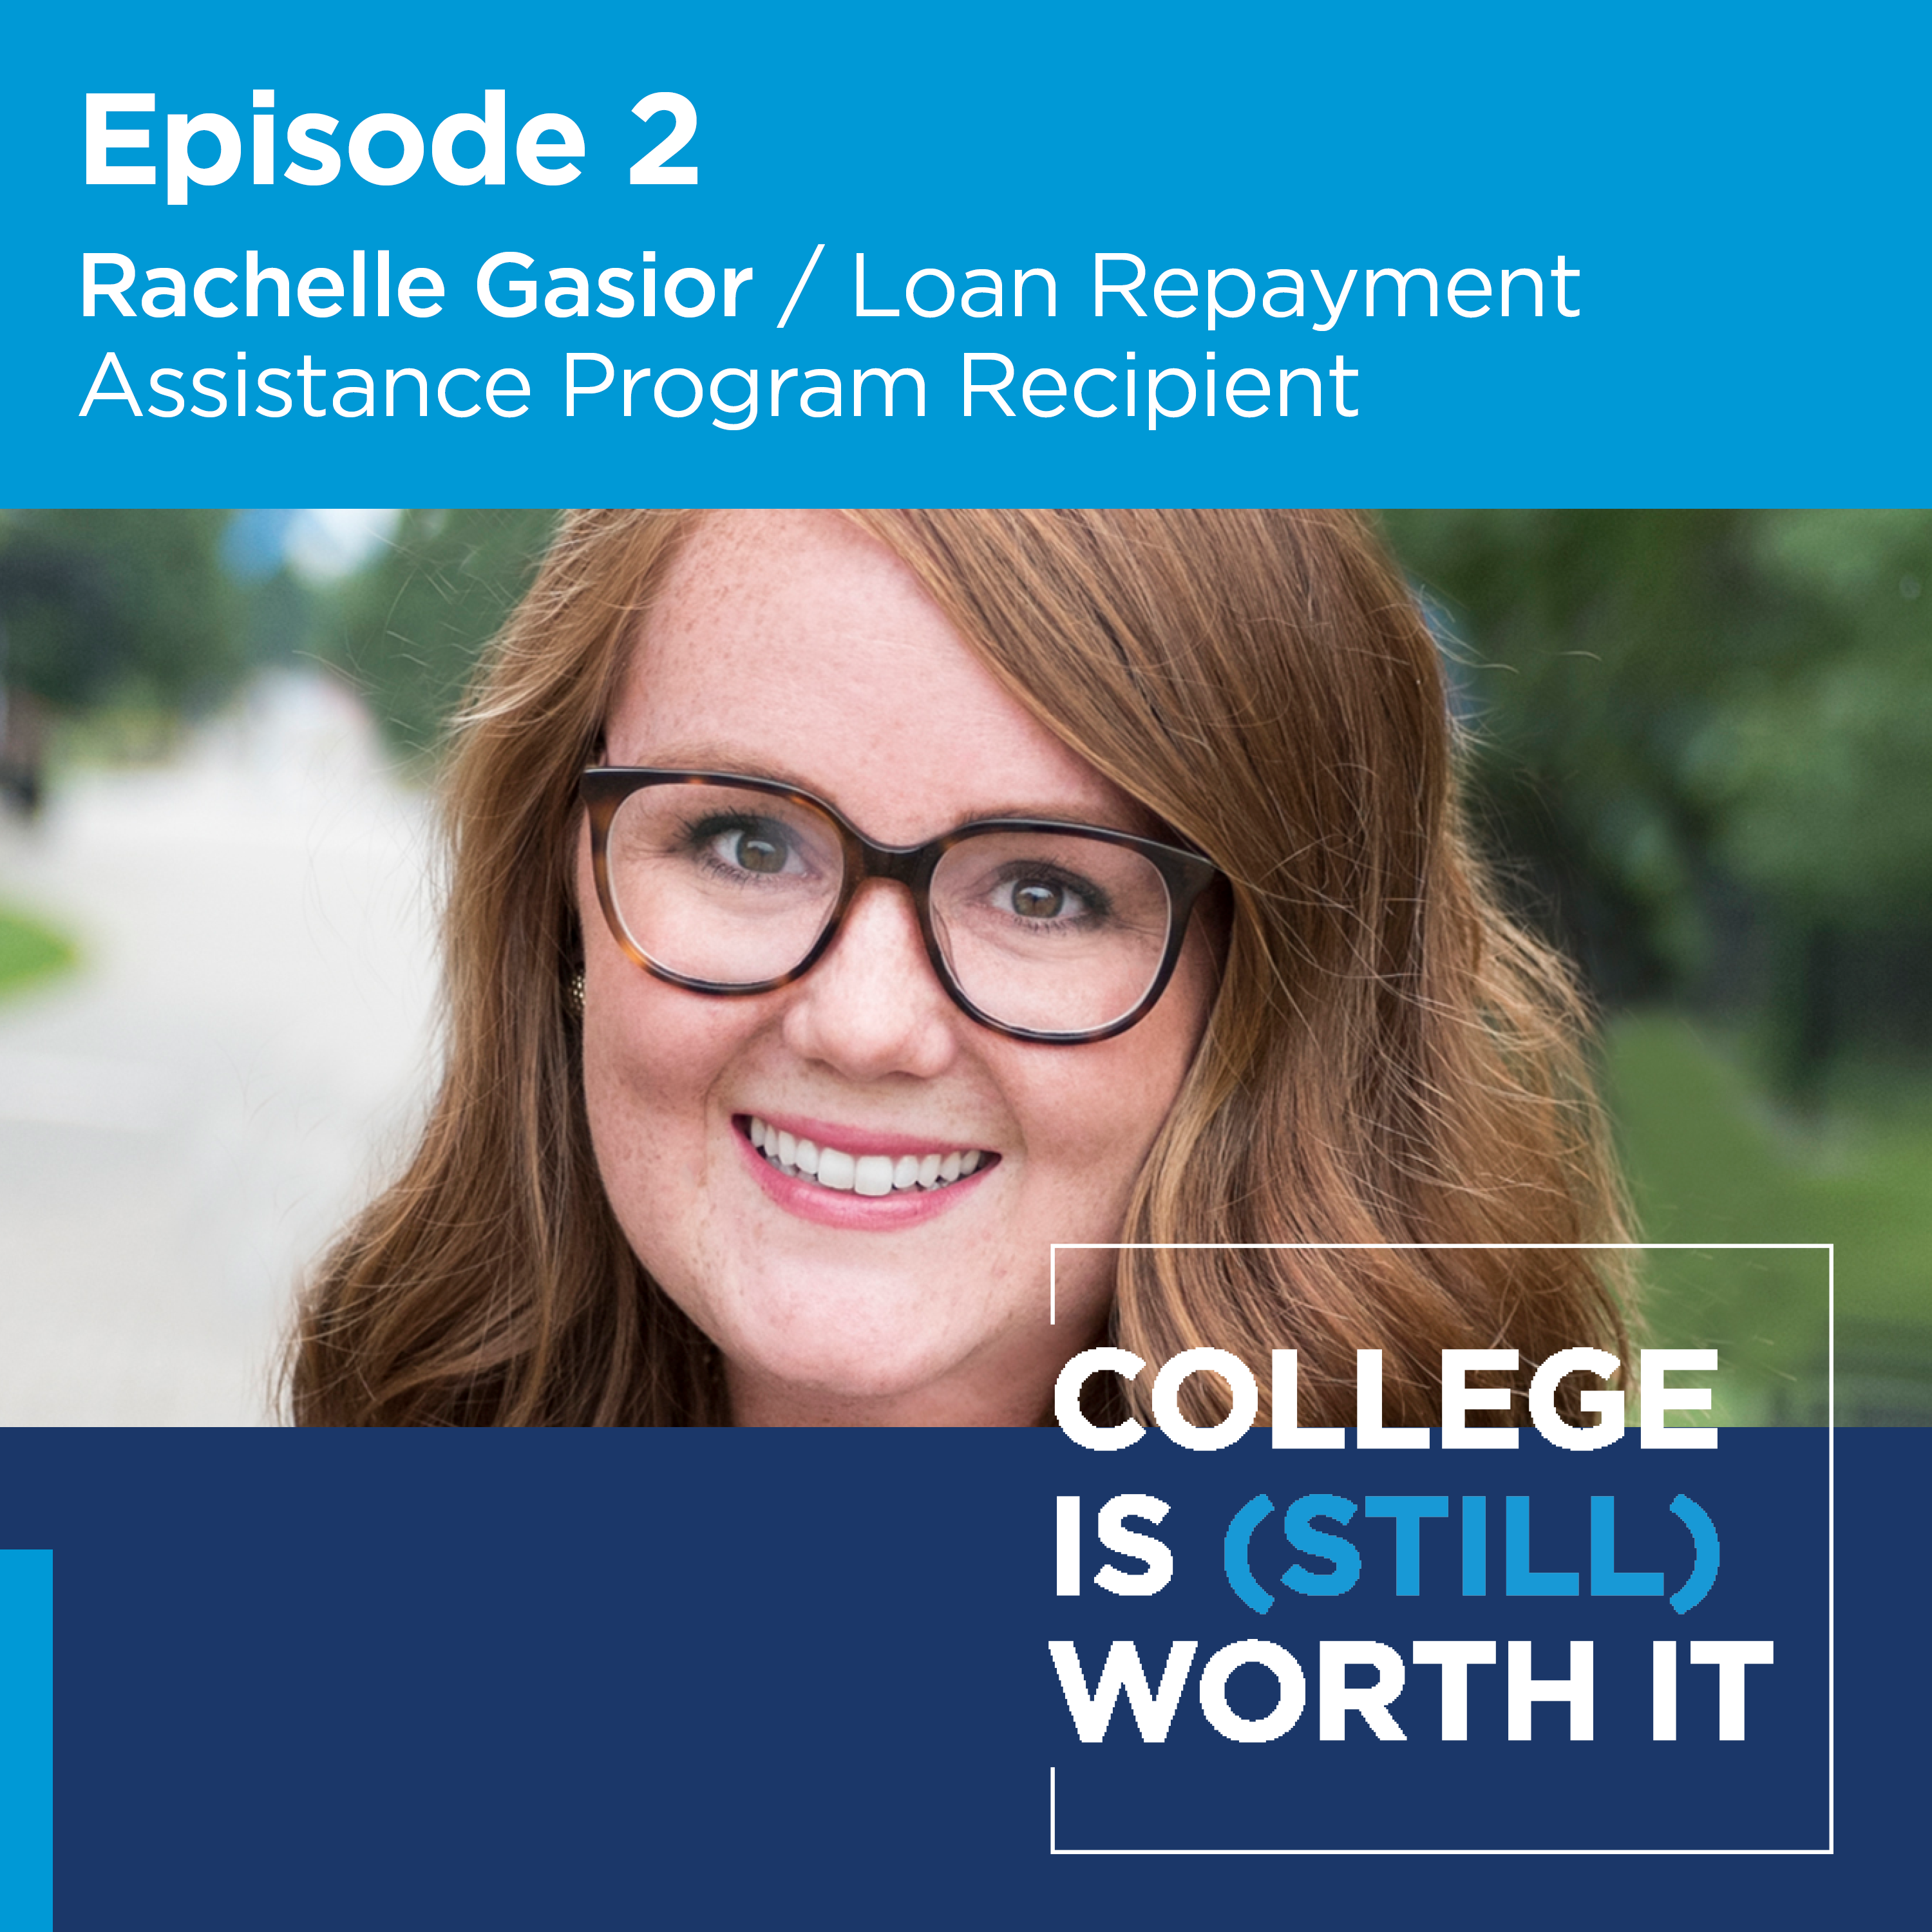 How One College Student Overcame Her Financial Barriers to College